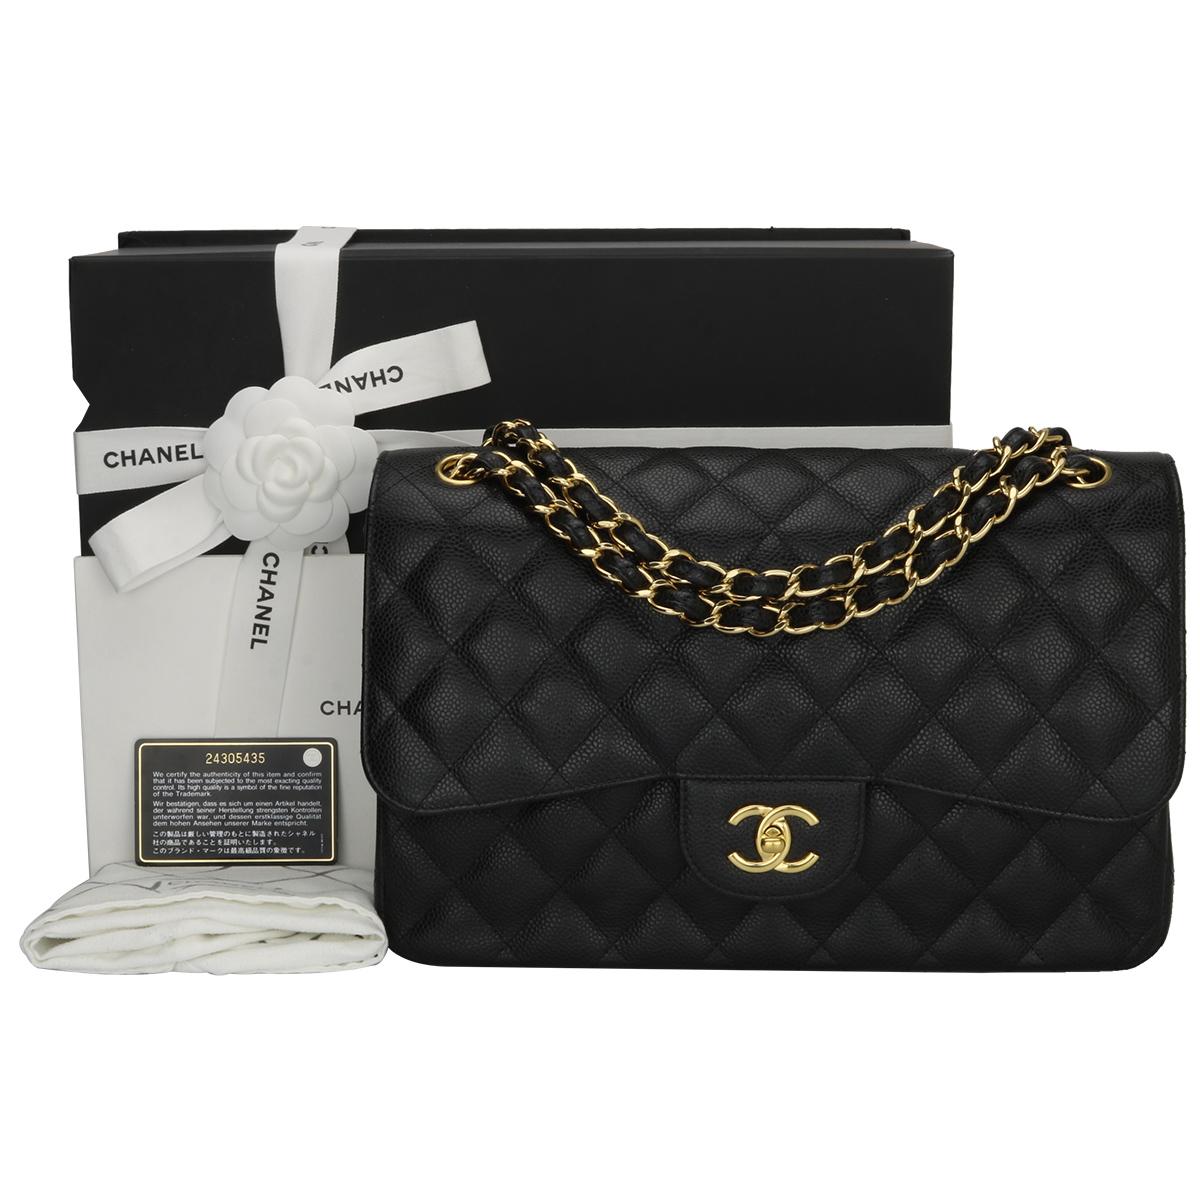 Authentic CHANEL Classic Jumbo Double Flap Bag Black Caviar with Gold Hardware 2017.

This stunning bag is in excellent-mint condition, the bag still holds its original shape, and the hardware is still very shiny. Leather smells fresh as if